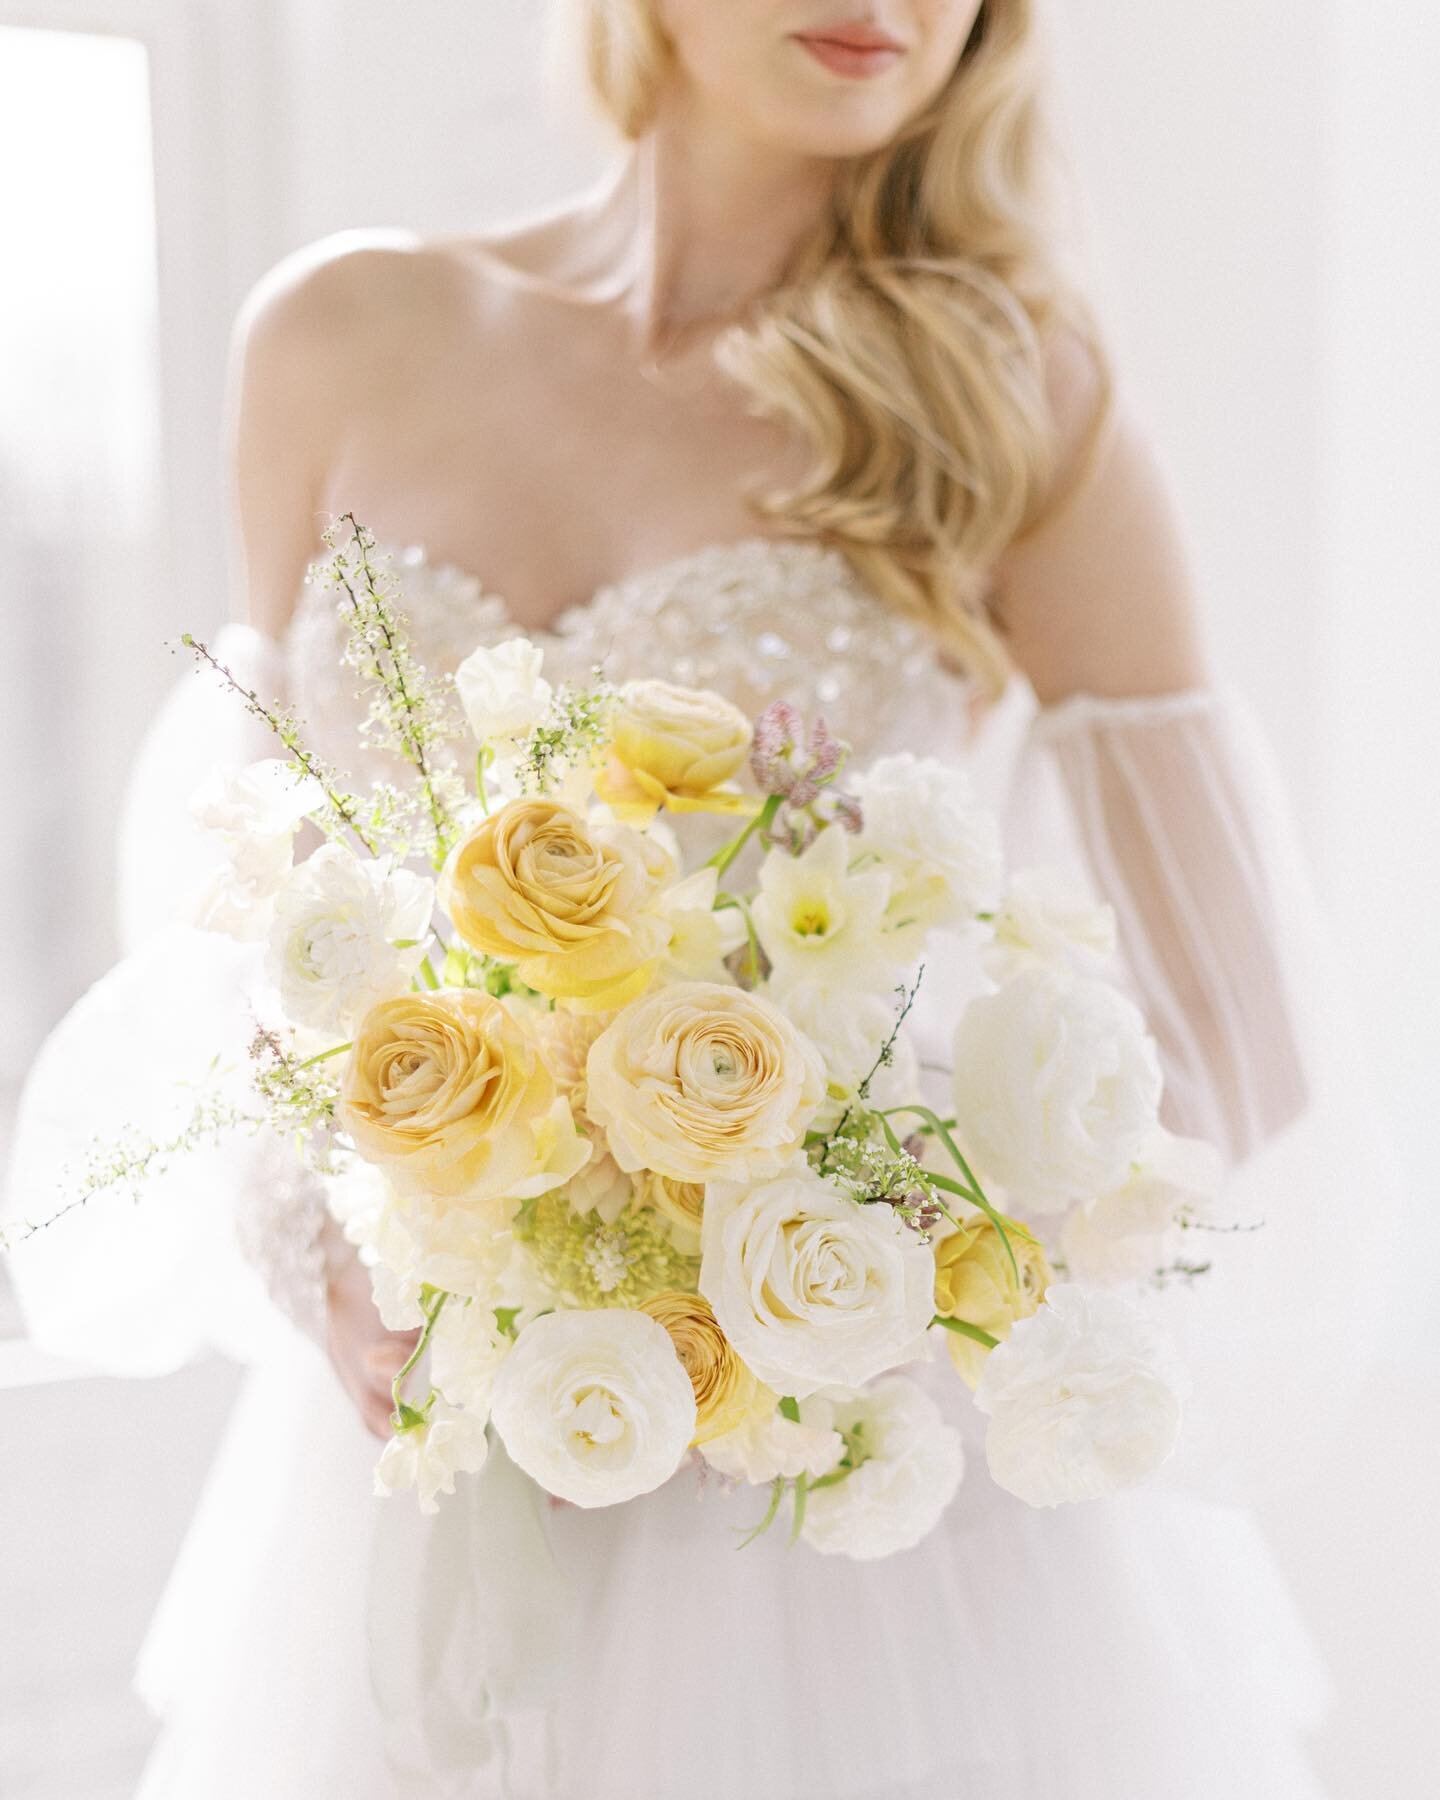 A little late-night editing to finish up and deliver this beautiful spring-inspired editorial. 🌼

Photo: @sierradyerco
Florals / Host:&nbsp;@lemonwoodfloral
Lead Photo / Host:&nbsp;@kassidyilaynestudios
Venue:&nbsp;flat51rental
Gown:&nbsp;@whitebrid